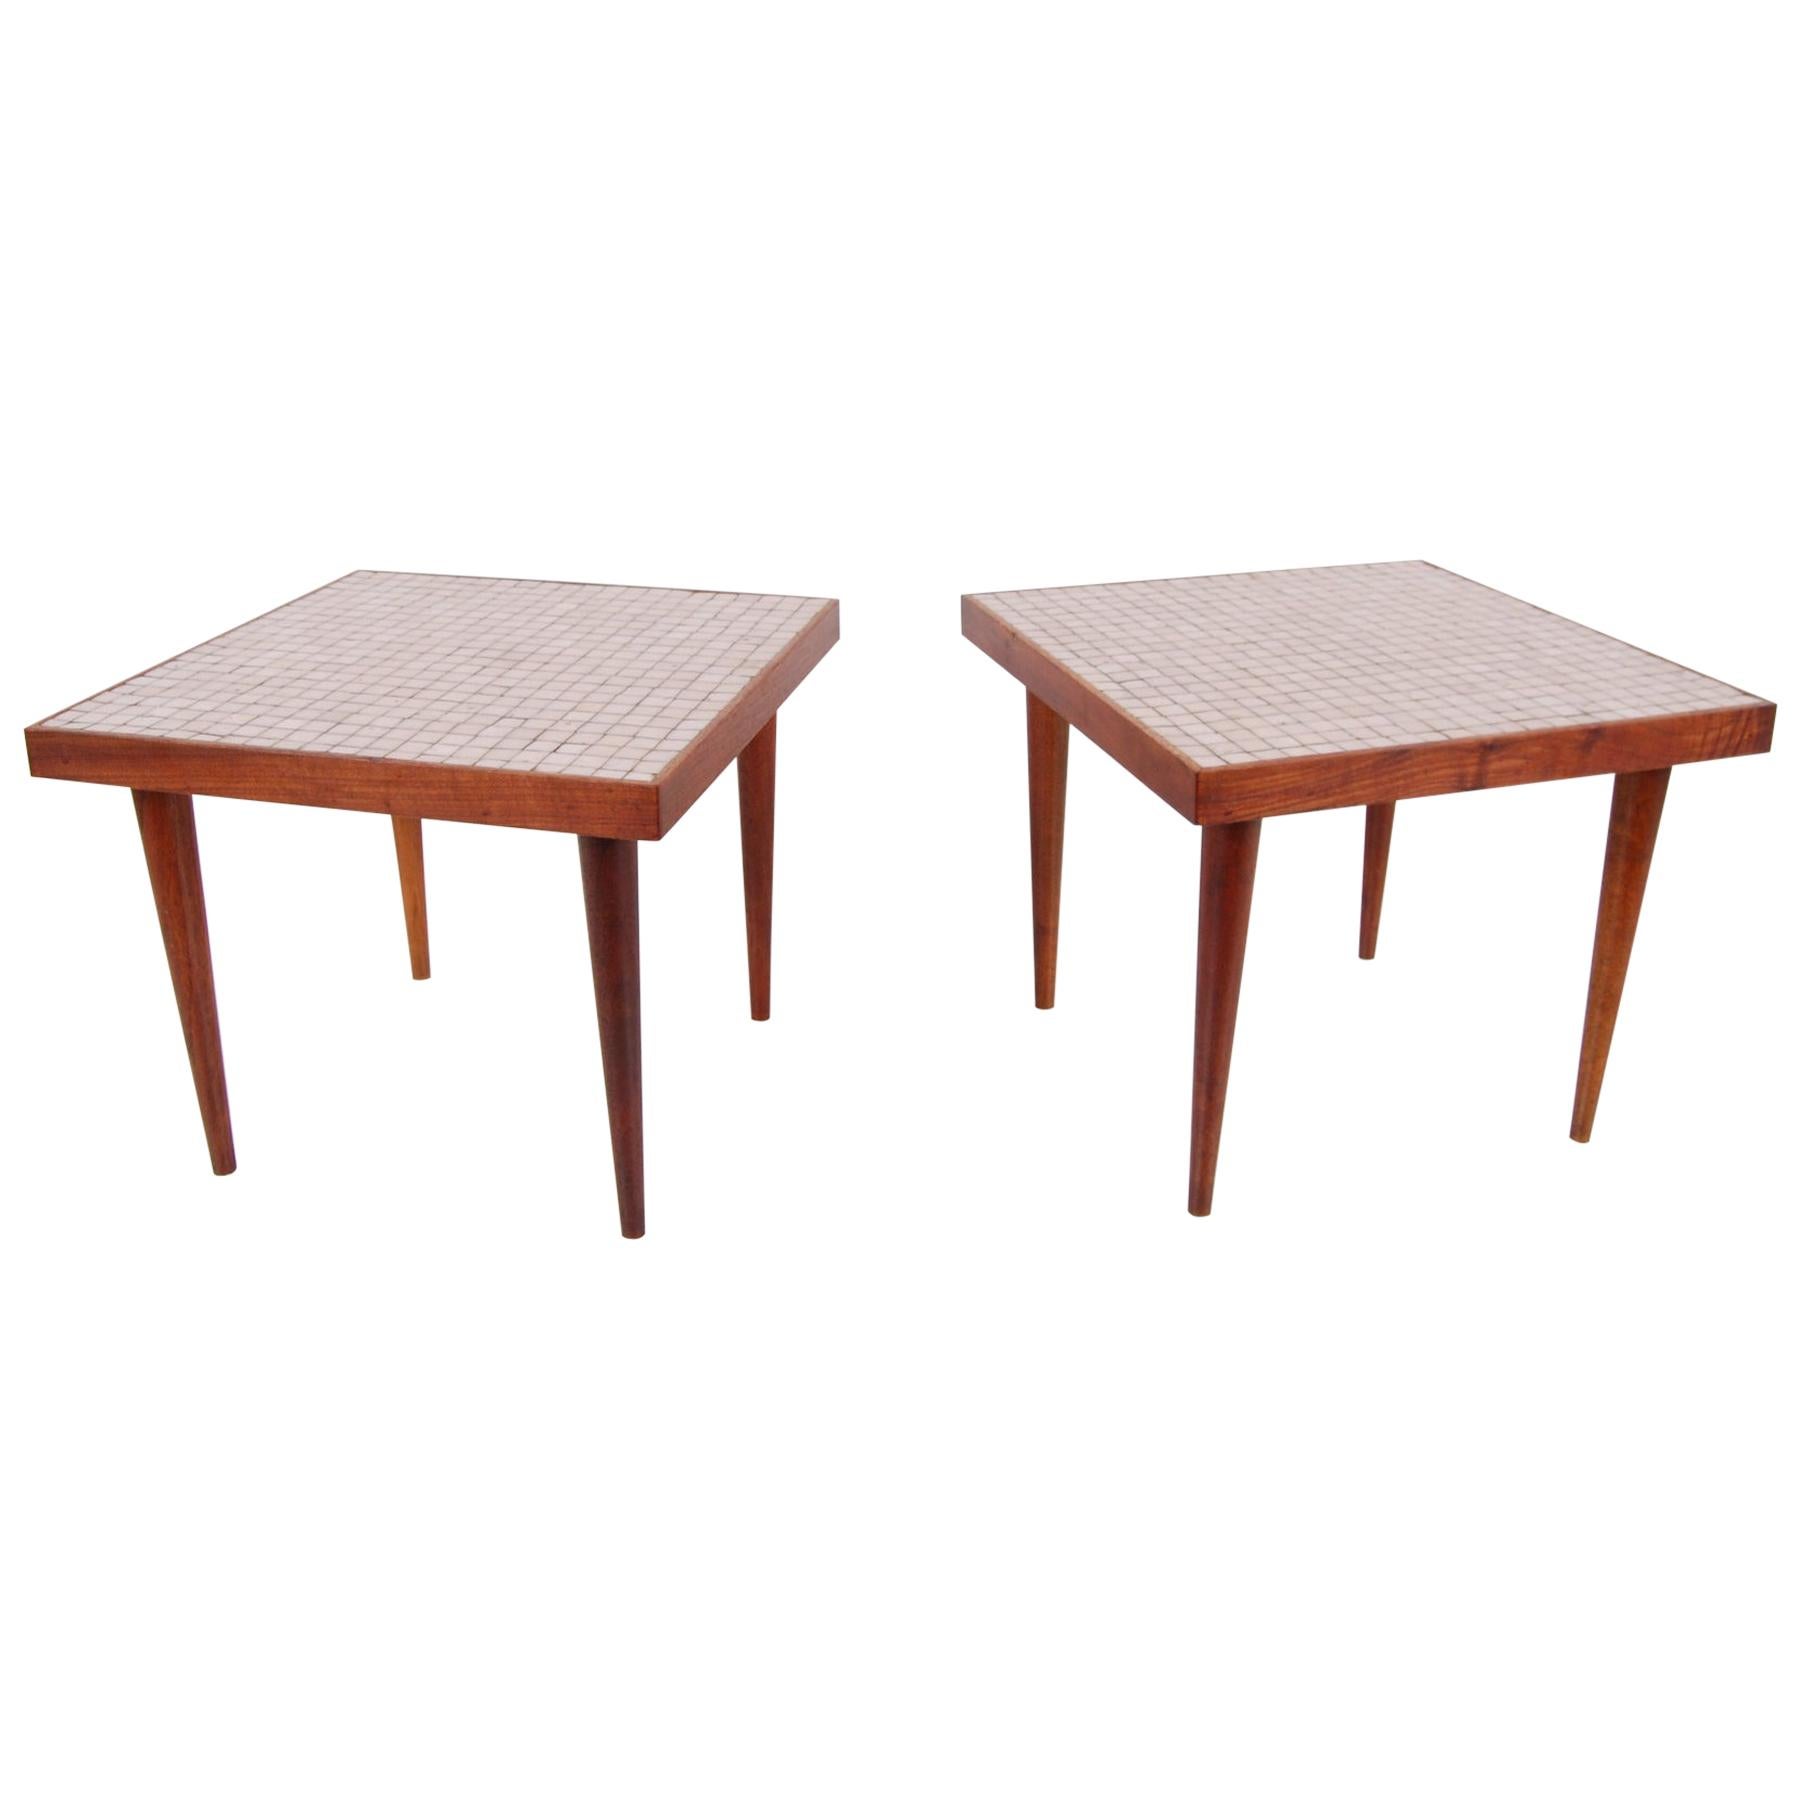 Pair of Walnut Tables with Murano Glass Tile Tops For Sale